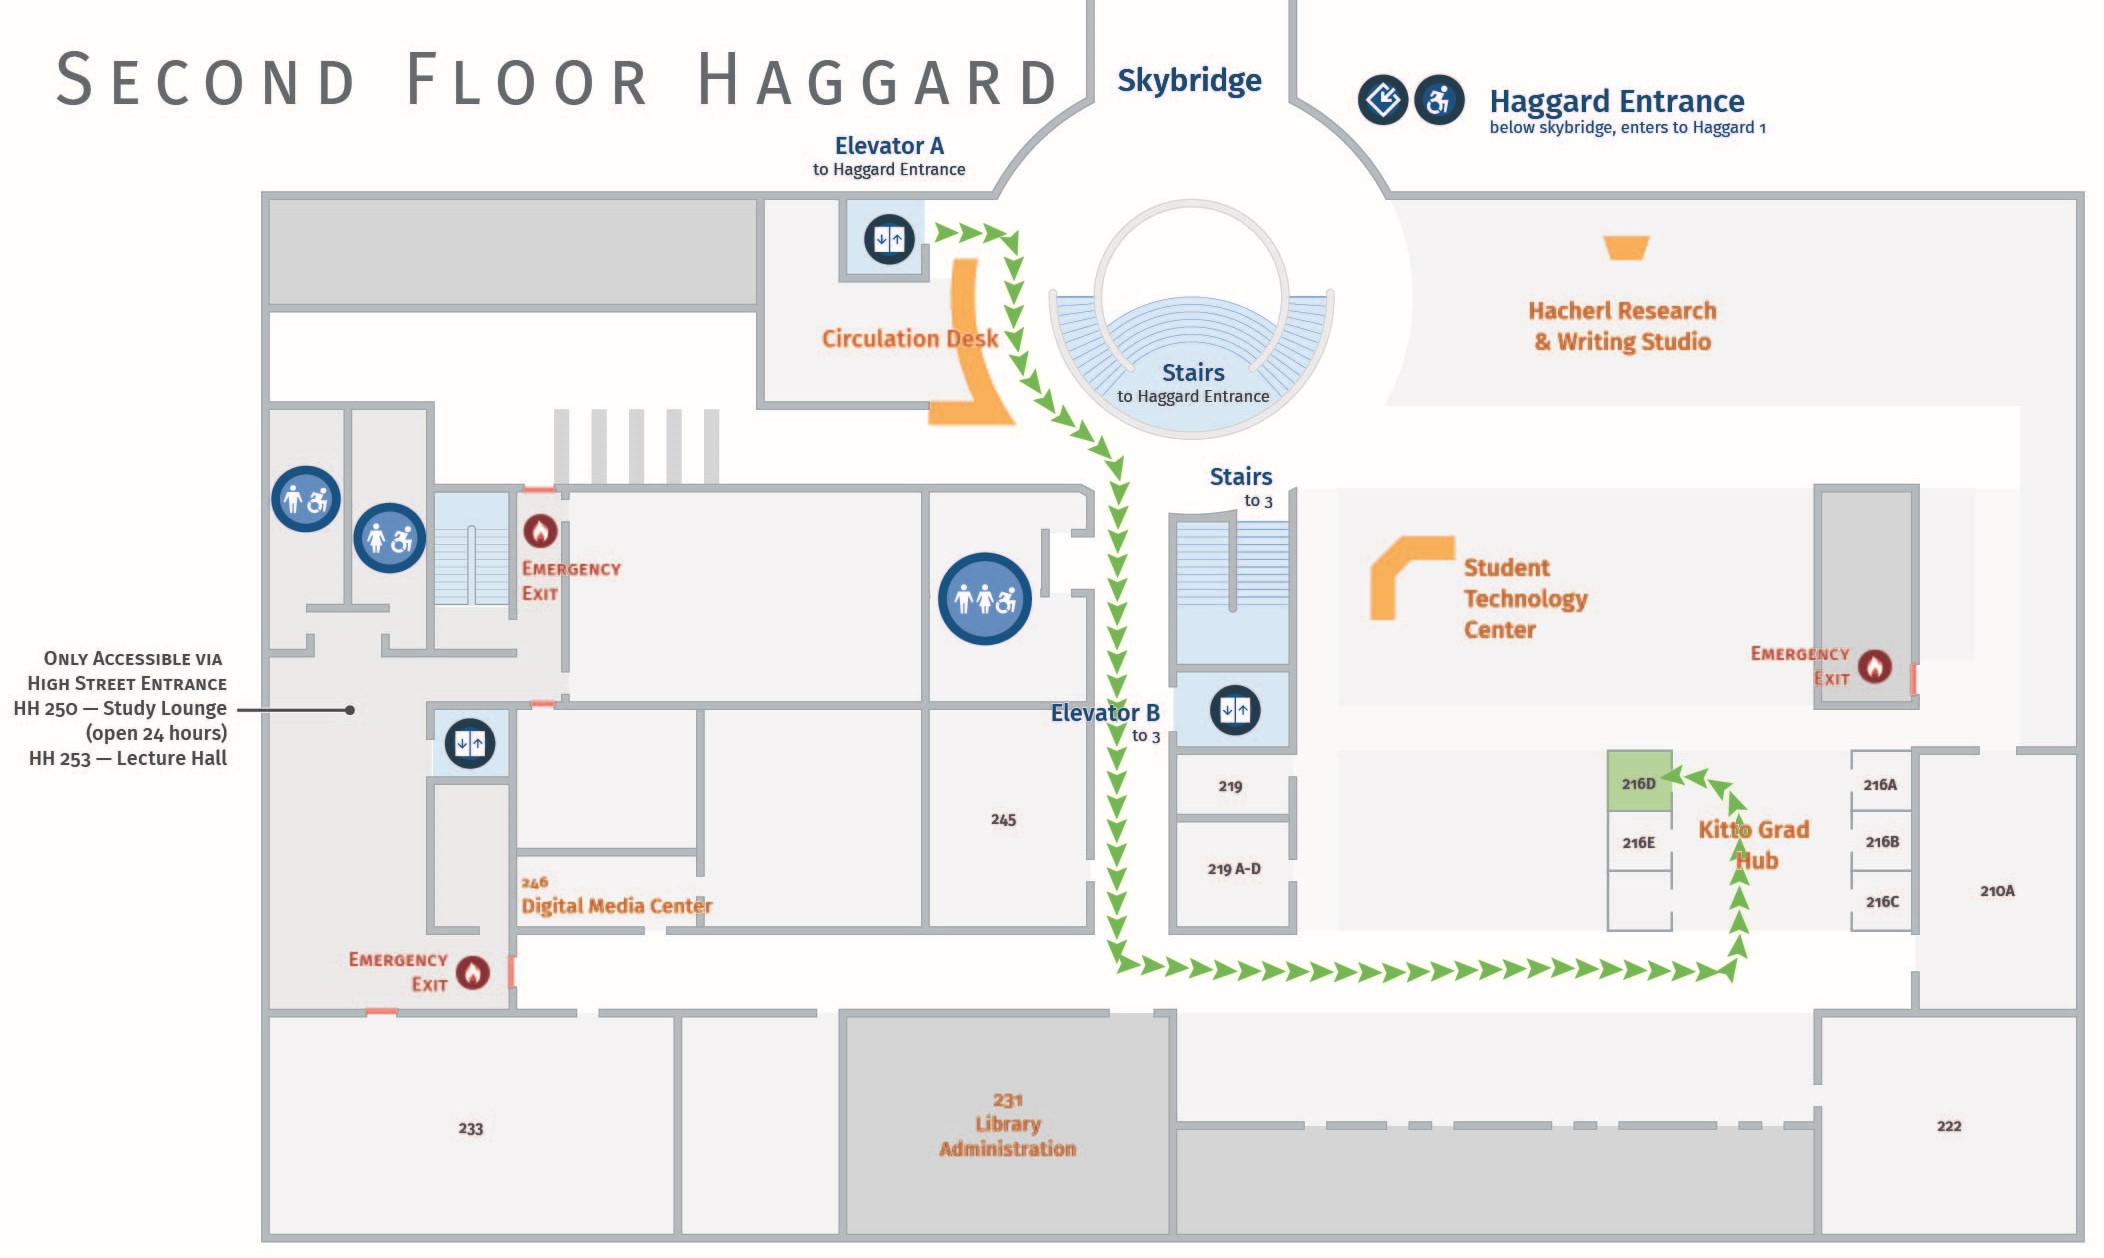 Floor plan, second floor Haggard with accessible path to HH 216D.